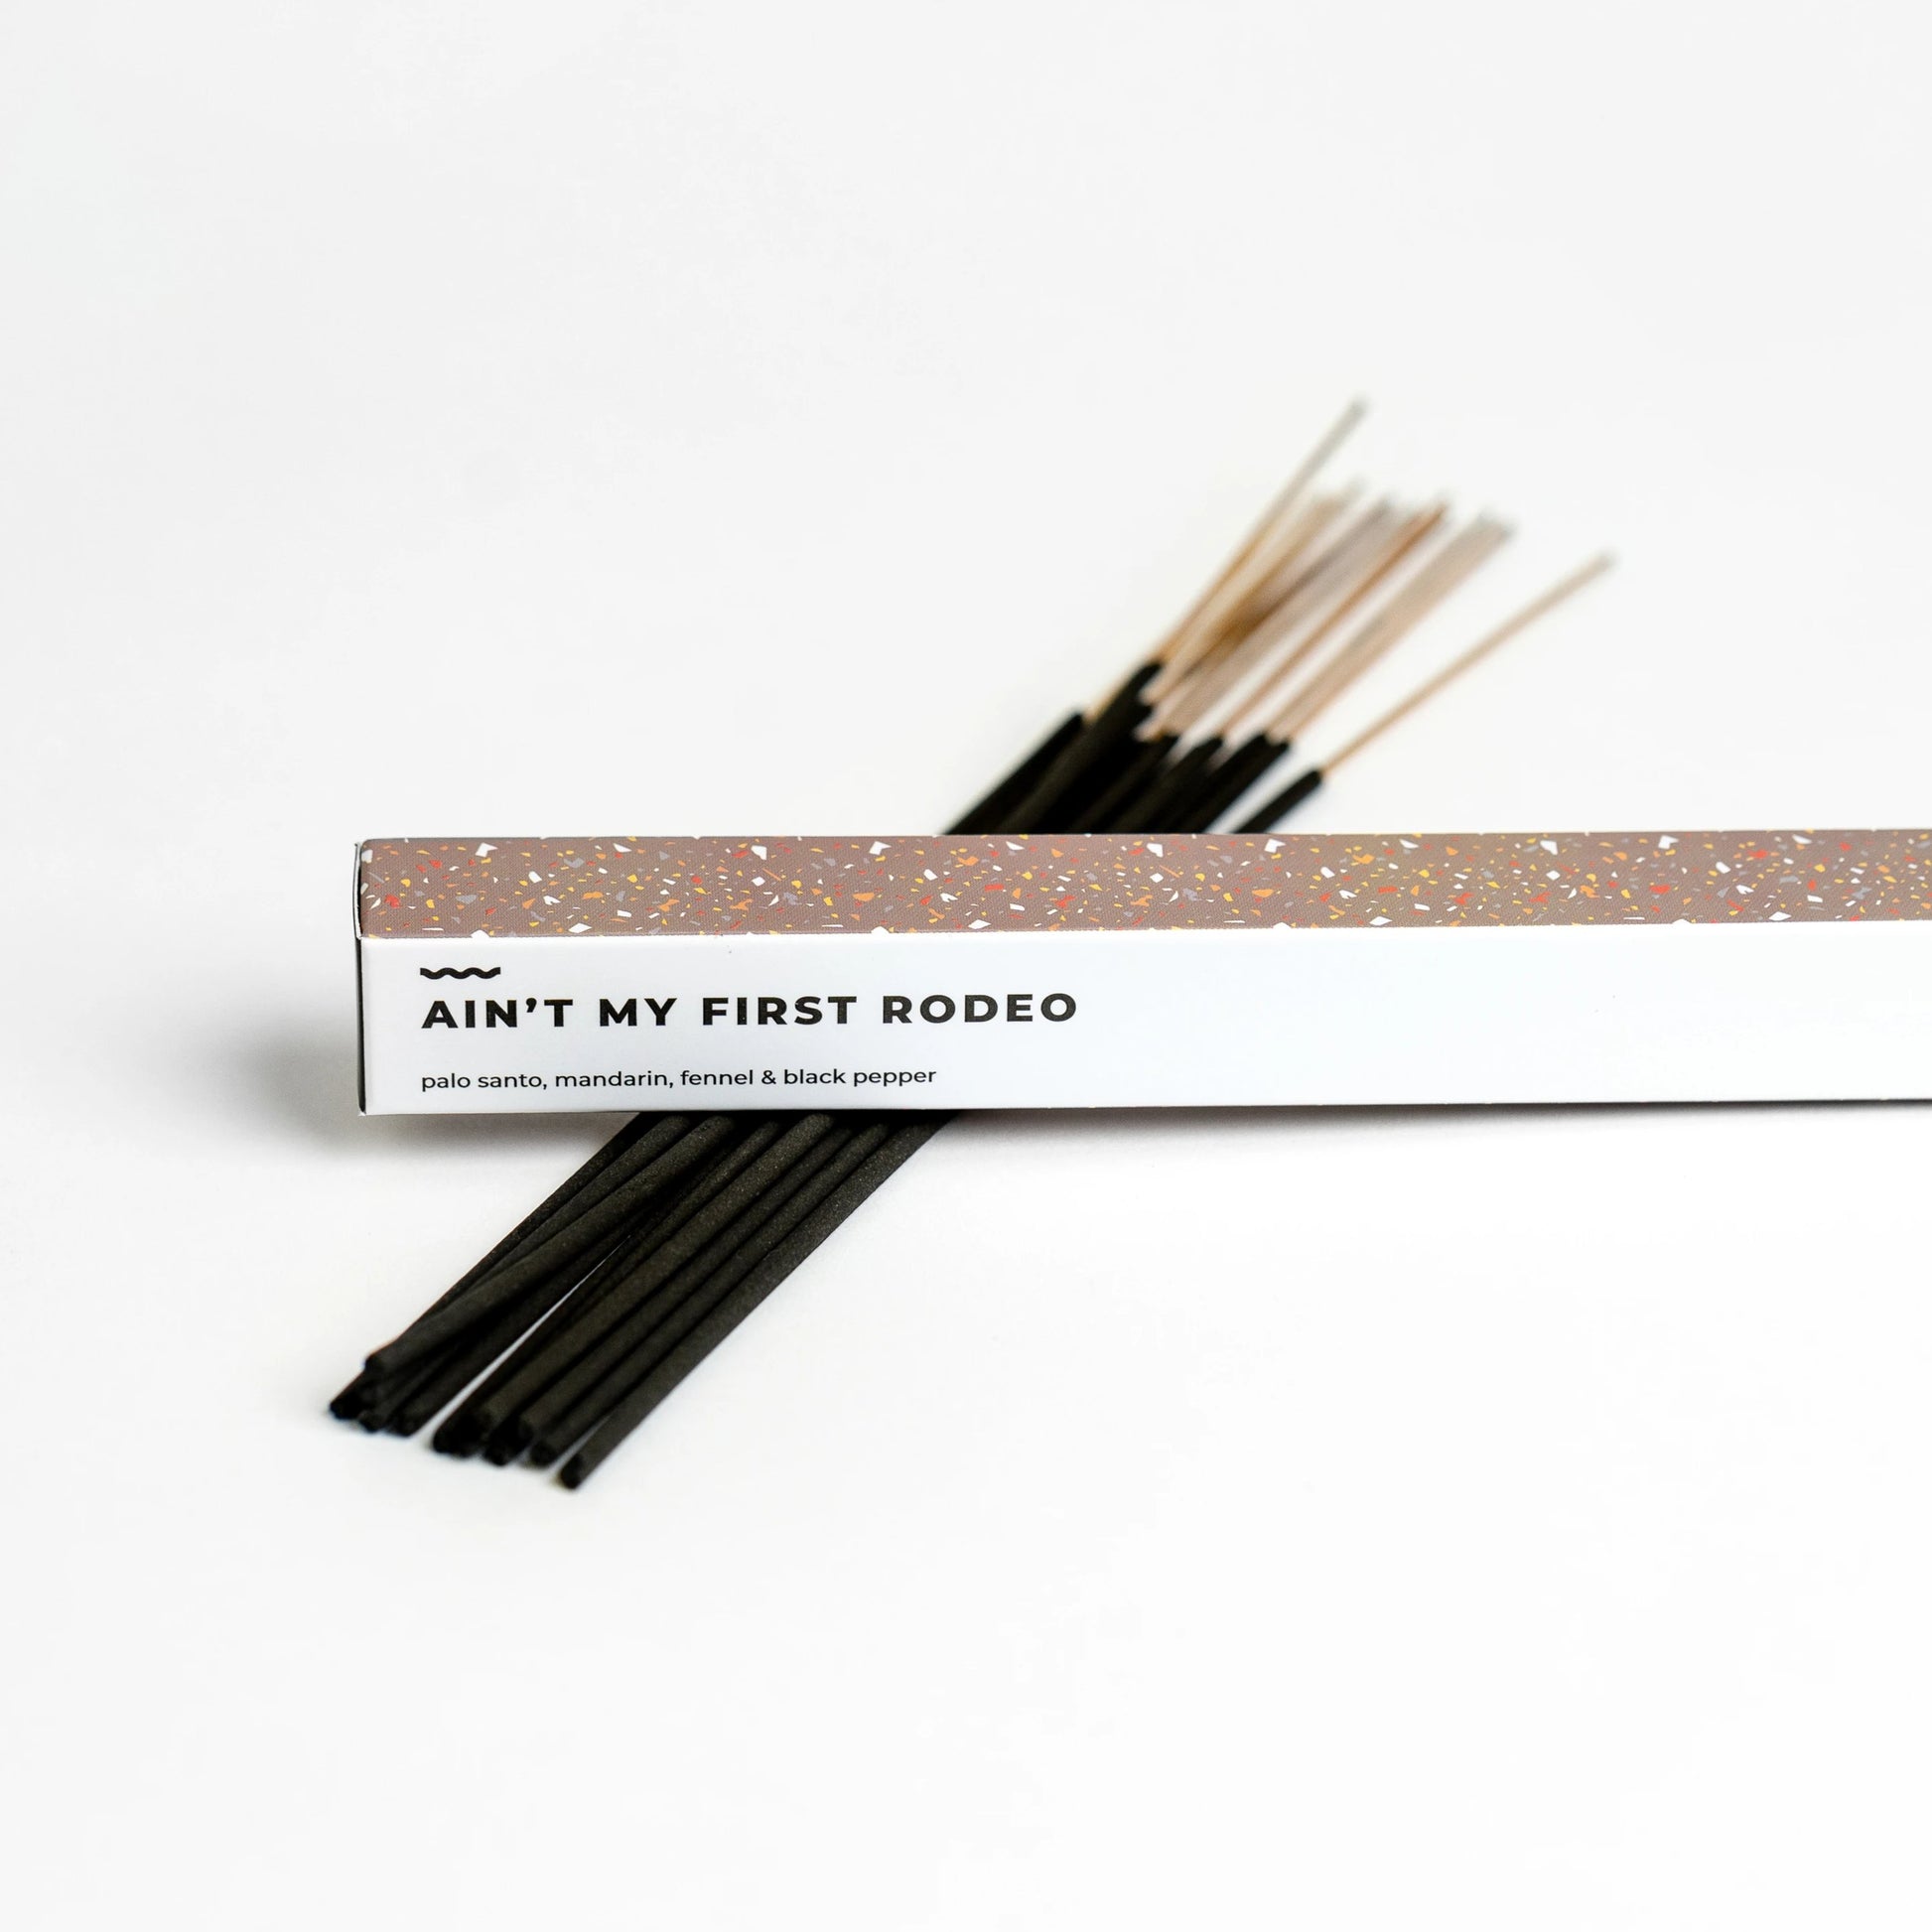 Charcoal incense sticks scented with therapeutic-grade essential oils.   Notes of: Palo Santo, Mandarin, Fennel & Black Pepper